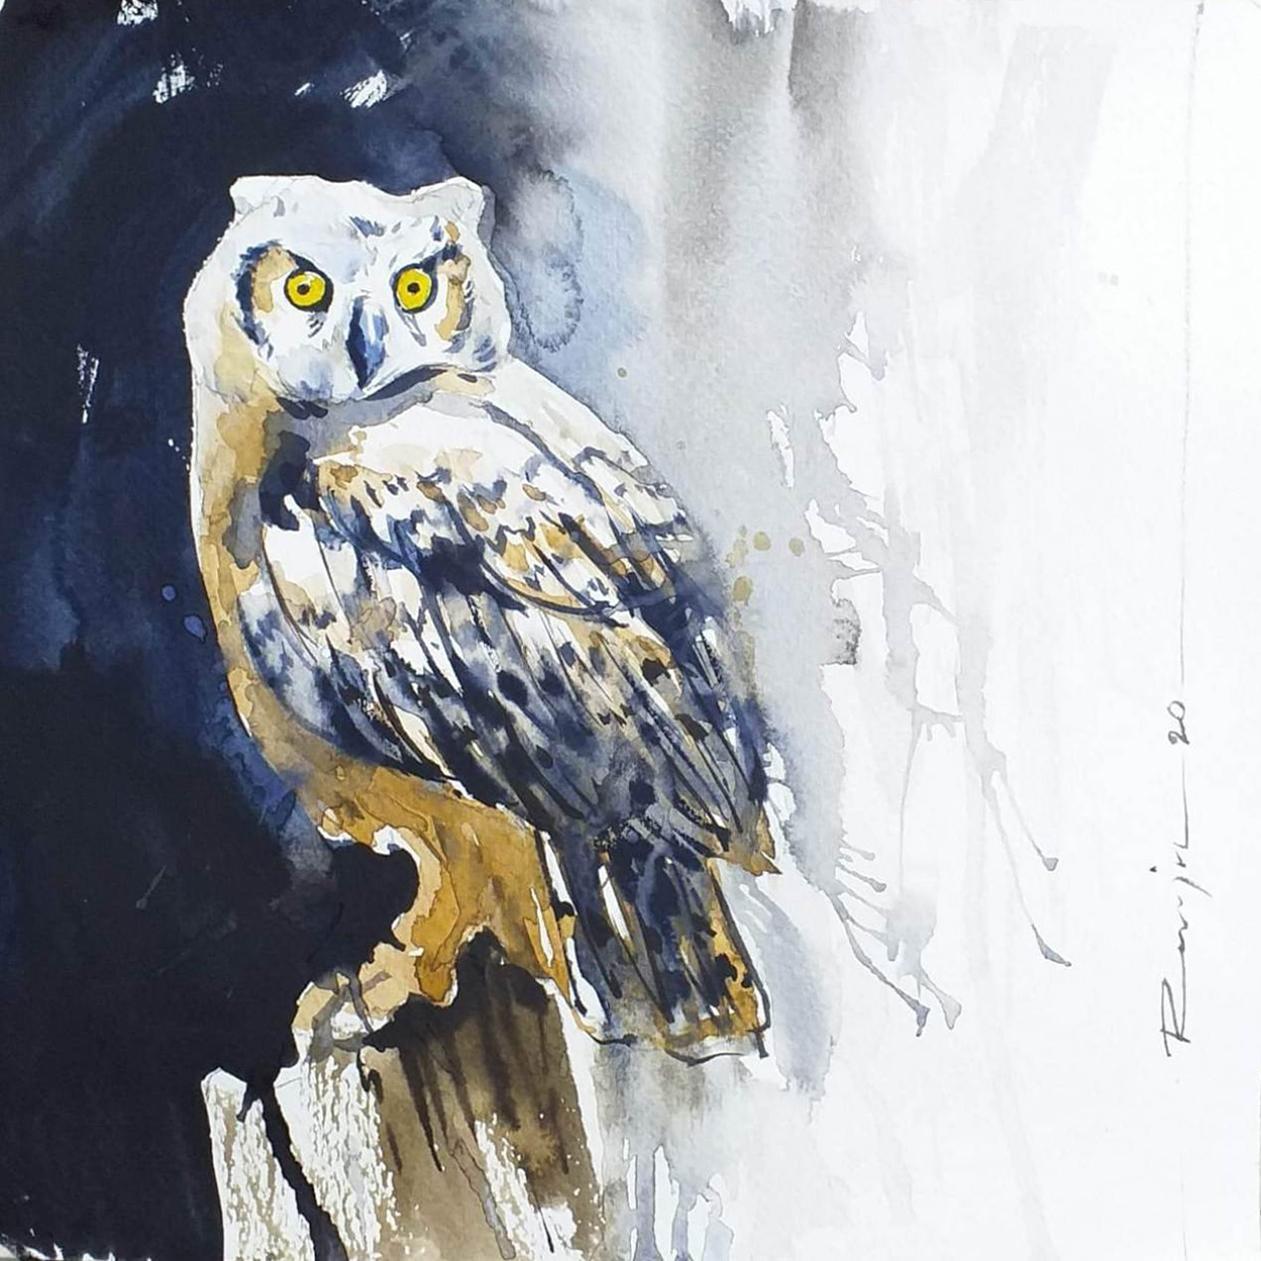 Raju Sarkar Figurative Painting - Owl, Watercolour on Paper by Contemporary Artist “In Stock”